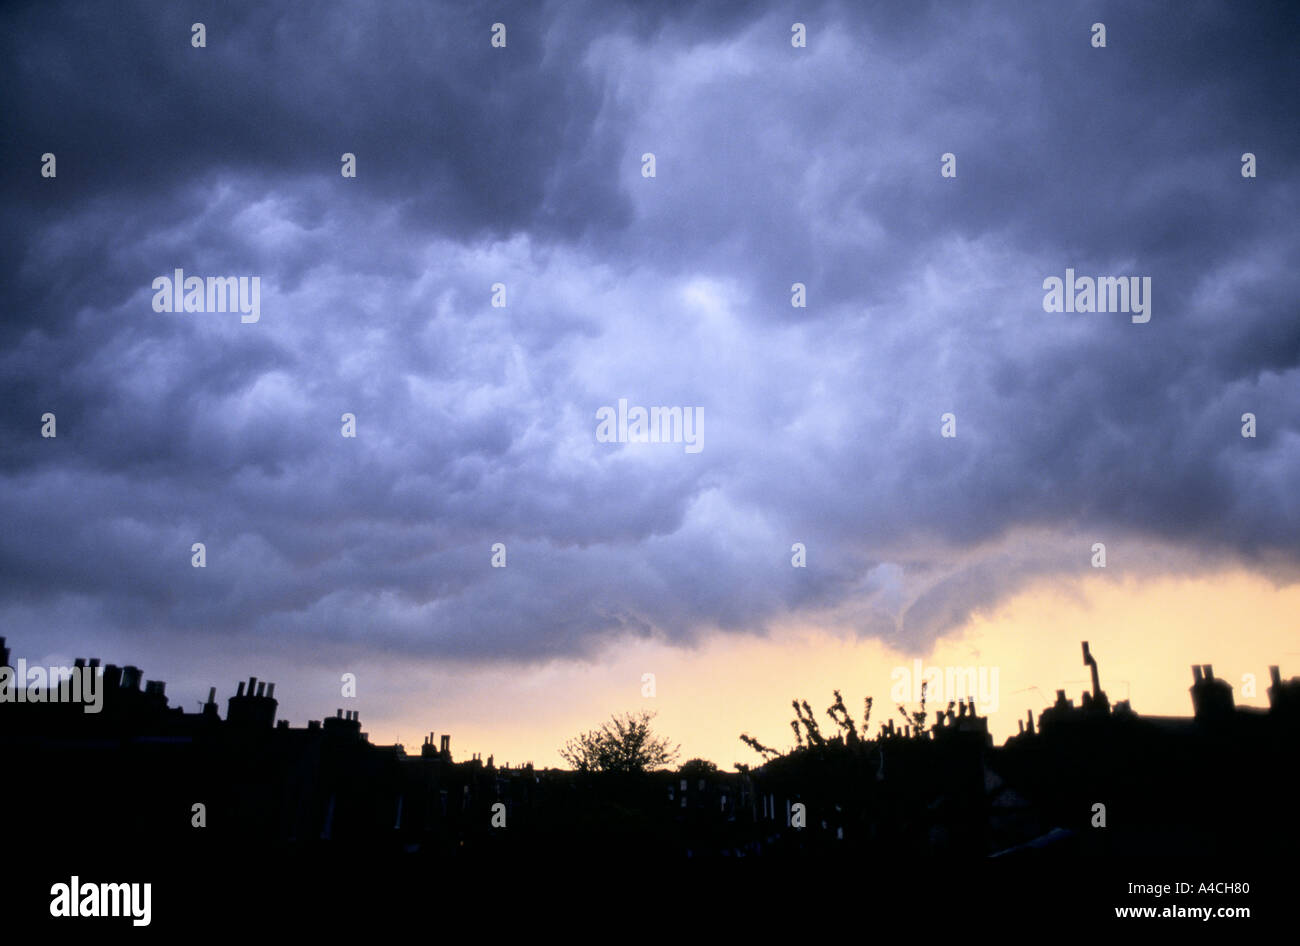 STORM CLOUDS OVER ROOFTOPS, HACKNEY, LONDON Stock Photo